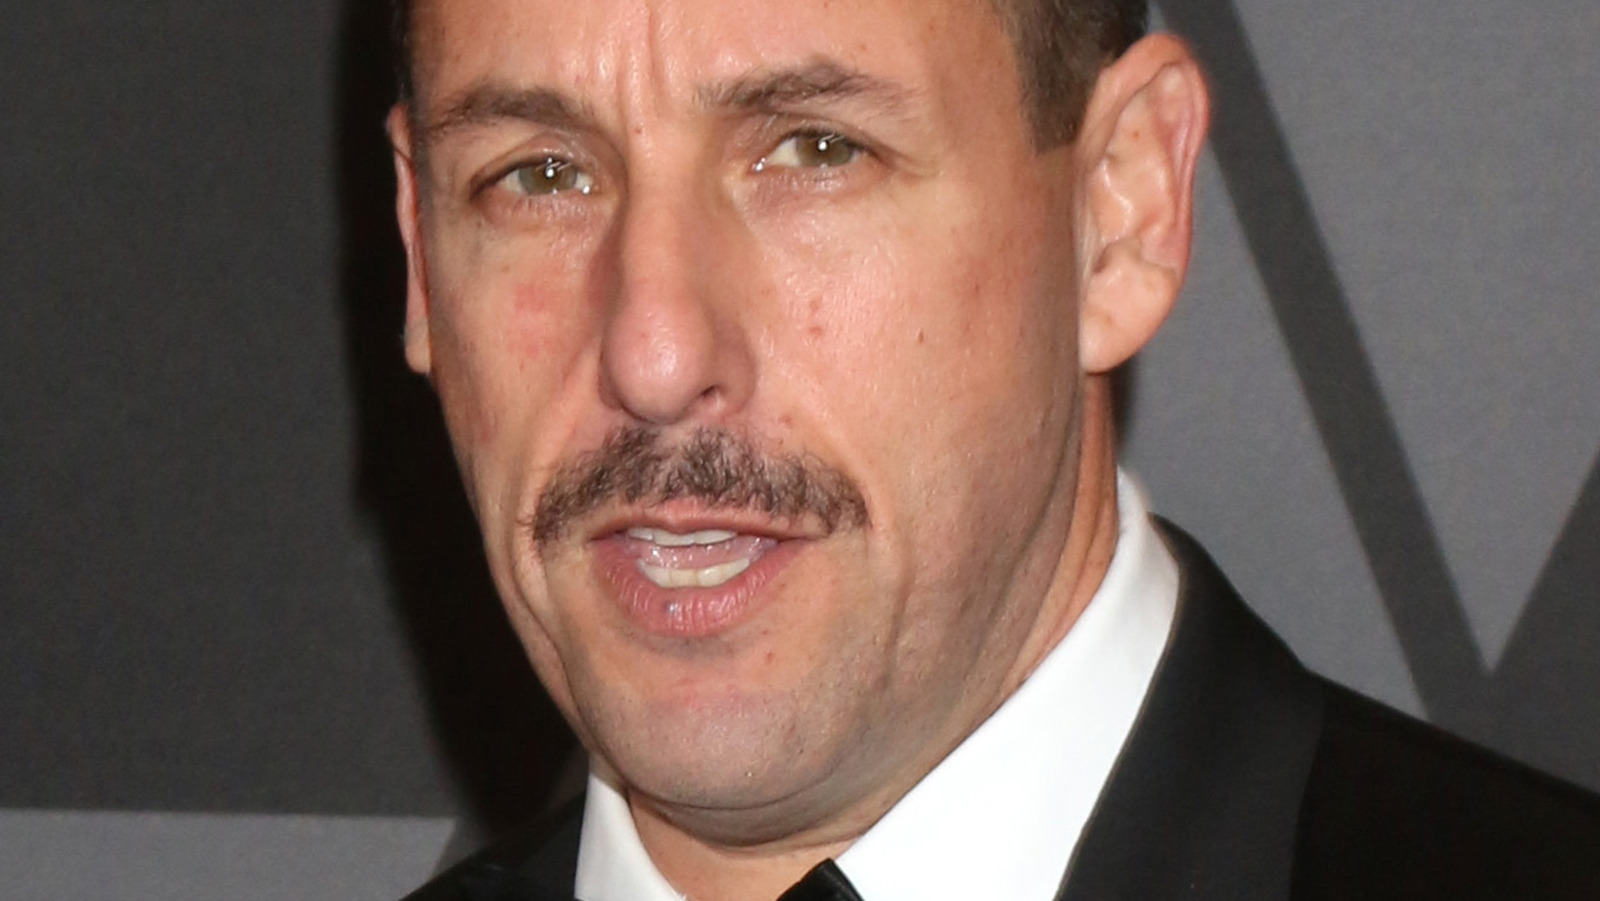 Adam Sandler Opens Up About A Hilariously On-Brand Injury